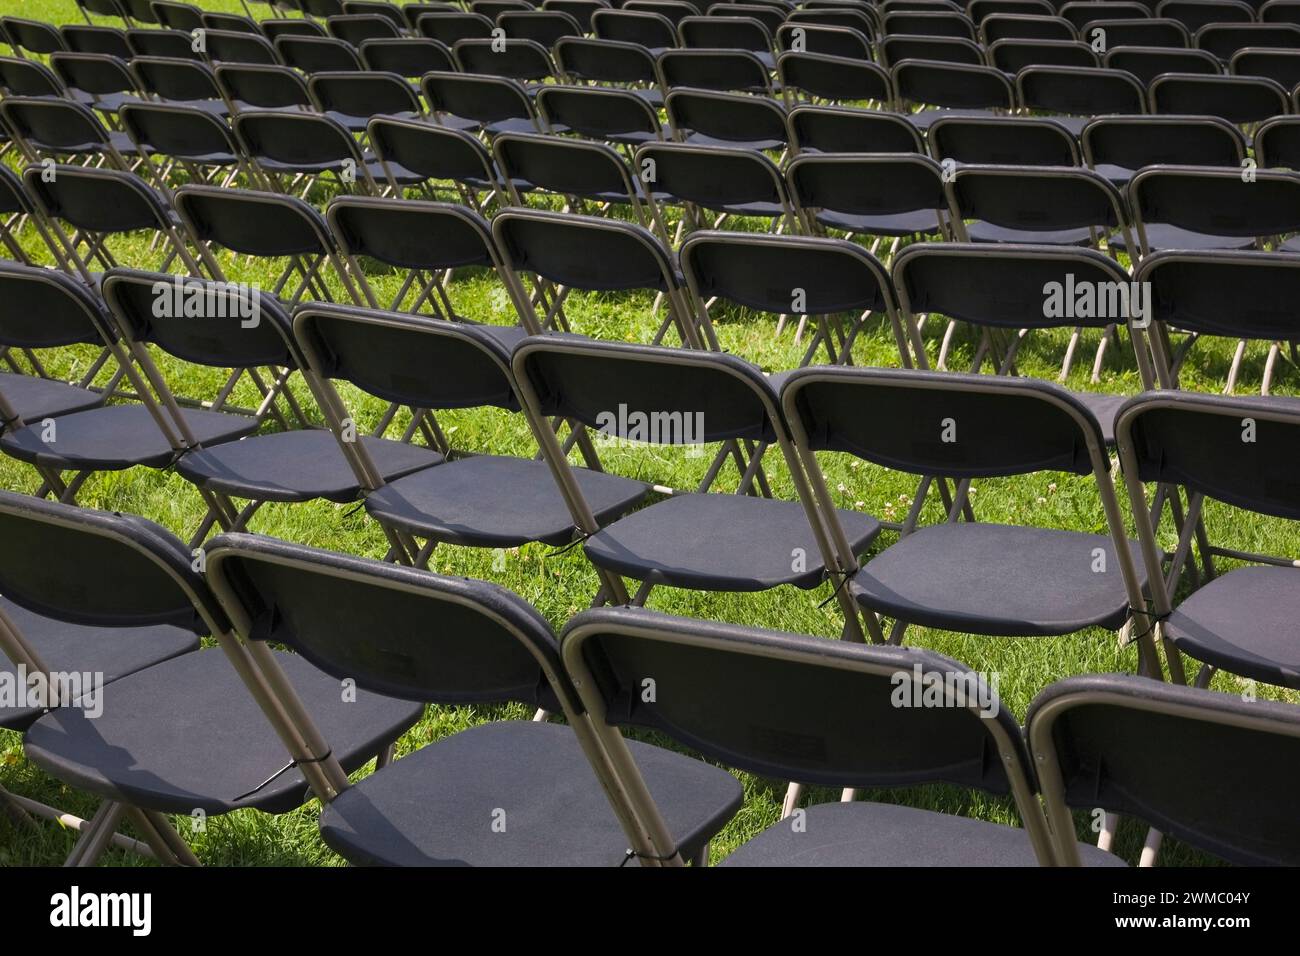 Rows of brown aluminium and black plastic folding sitting chairs on green grass set up for spectators attending an event in summer. Stock Photo